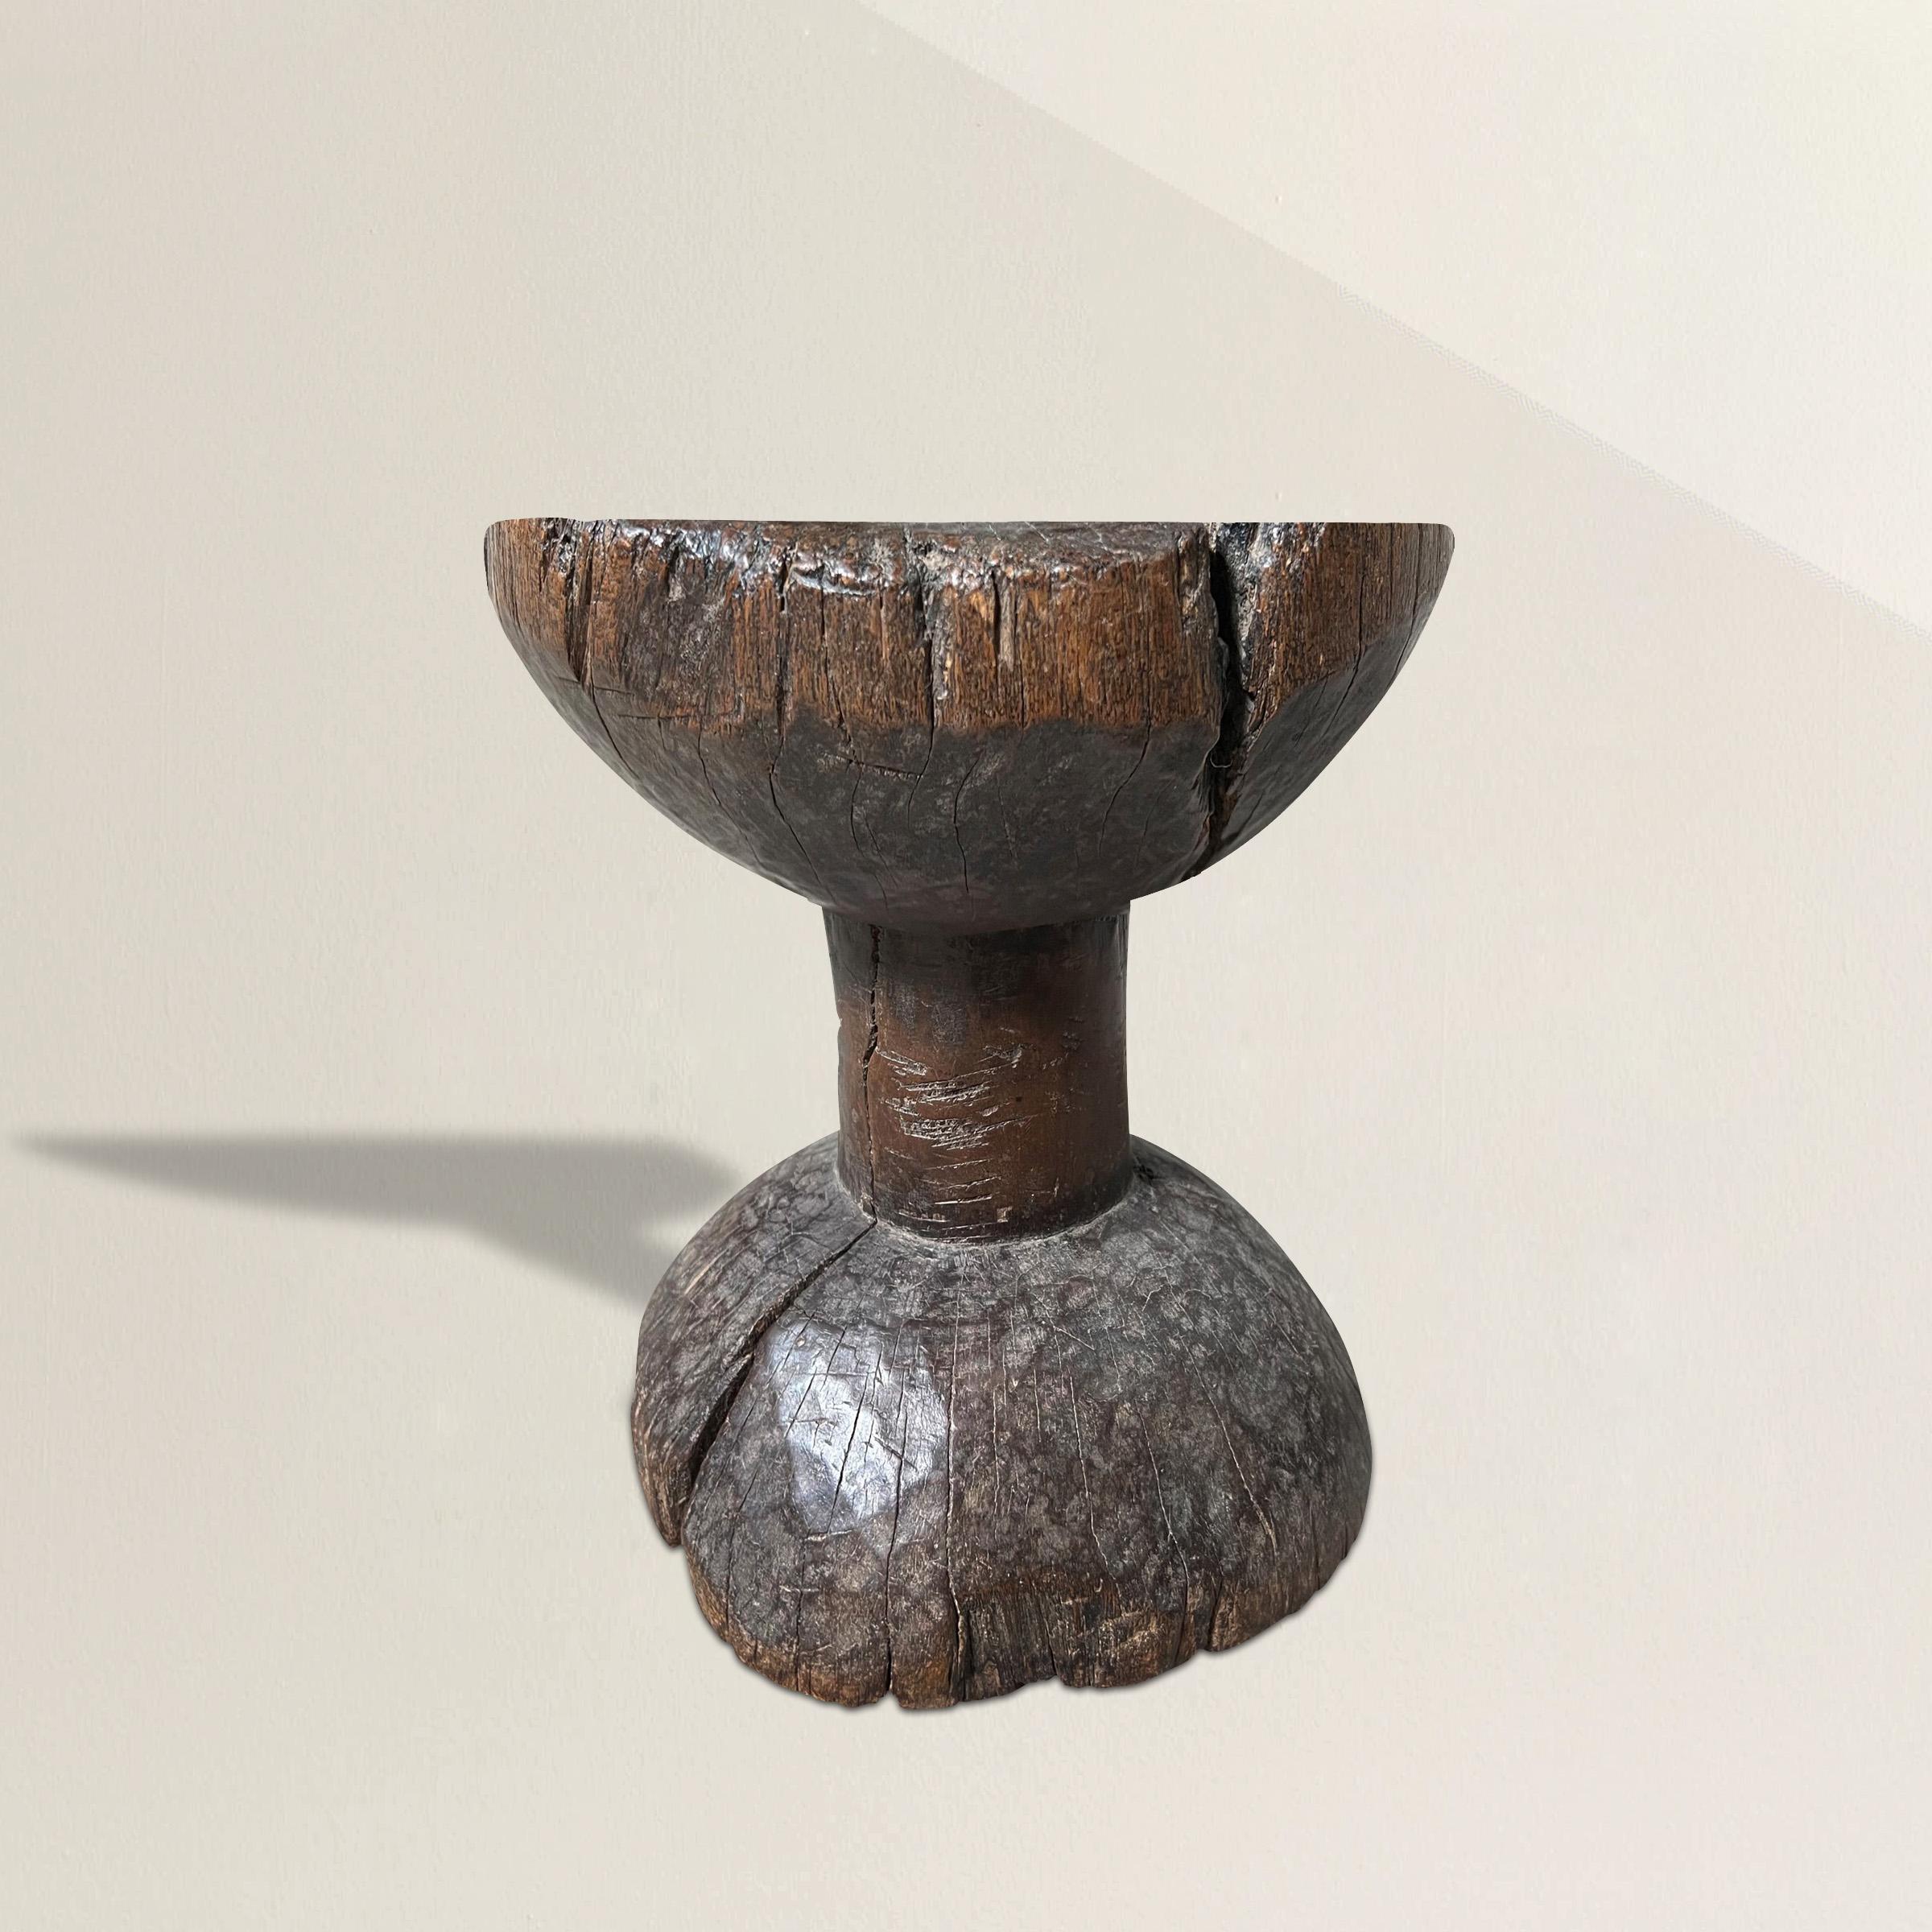 A chic modernist early 20th century Dan Peoples stool from Ivory Coast, carved from one piece of wood with a simple hourglass form, and the most wonderful patina only time could bestow. The perfect stool, or drinks table next to your favorite